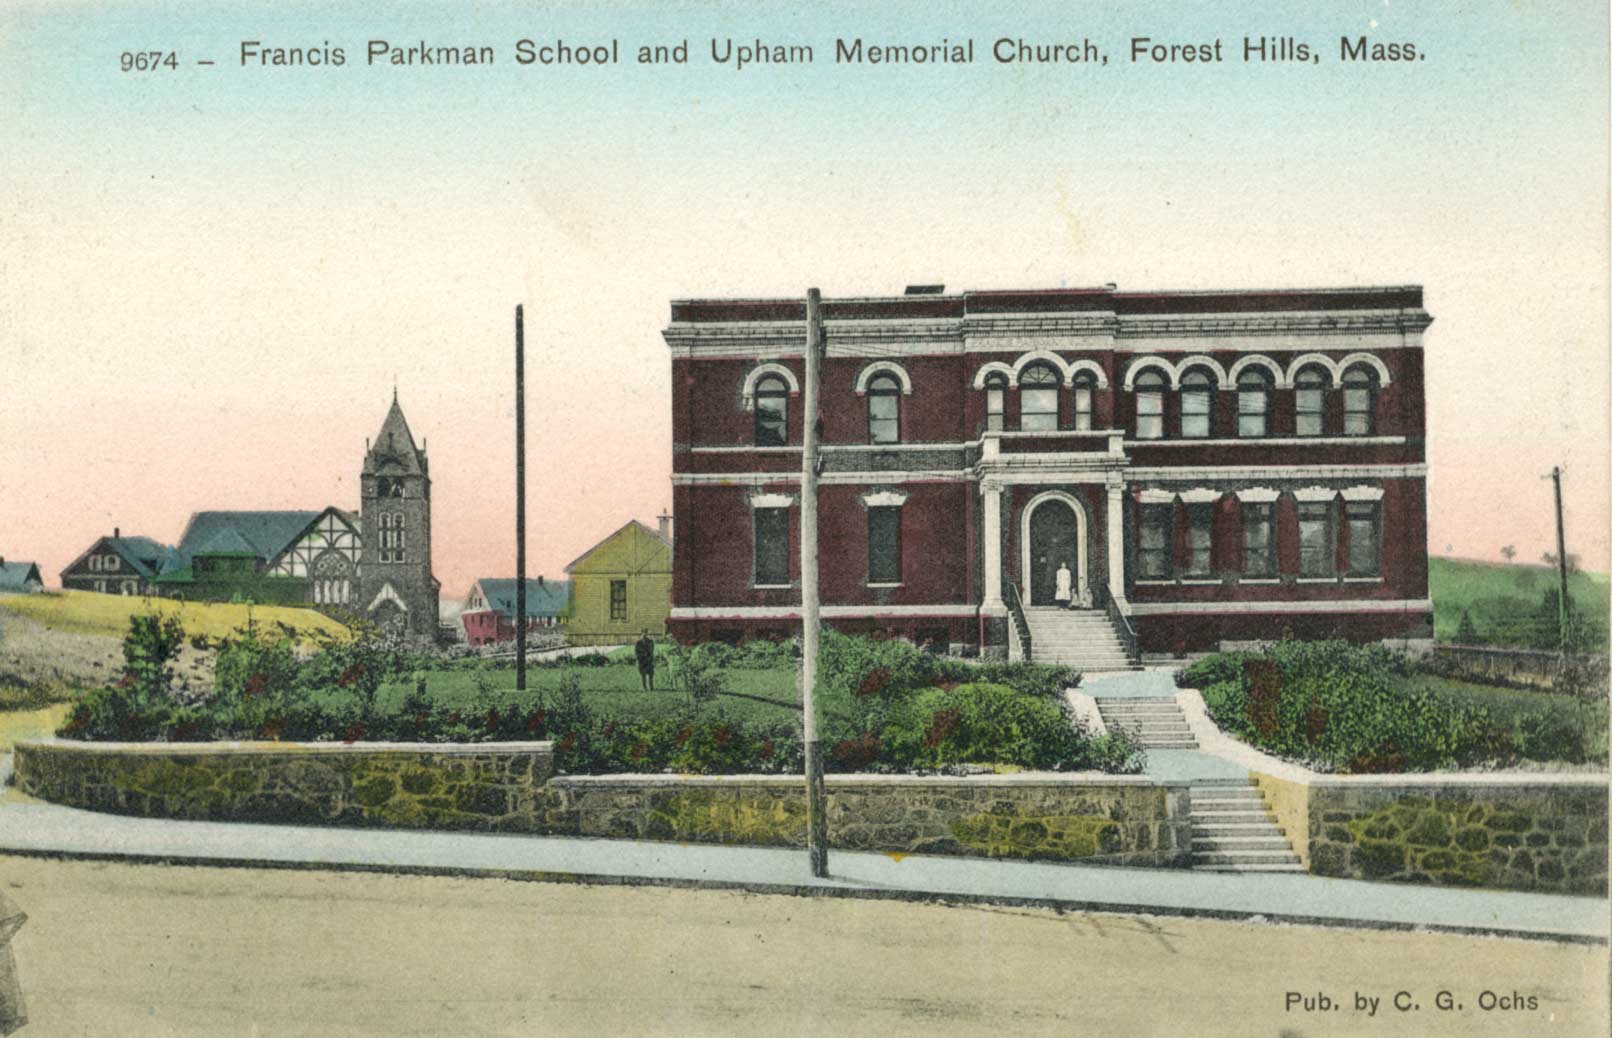   The Parkman School with Upham Memorial Church in the background. Scanned from a postcard donated by Annie Finnegan, November 2007.  